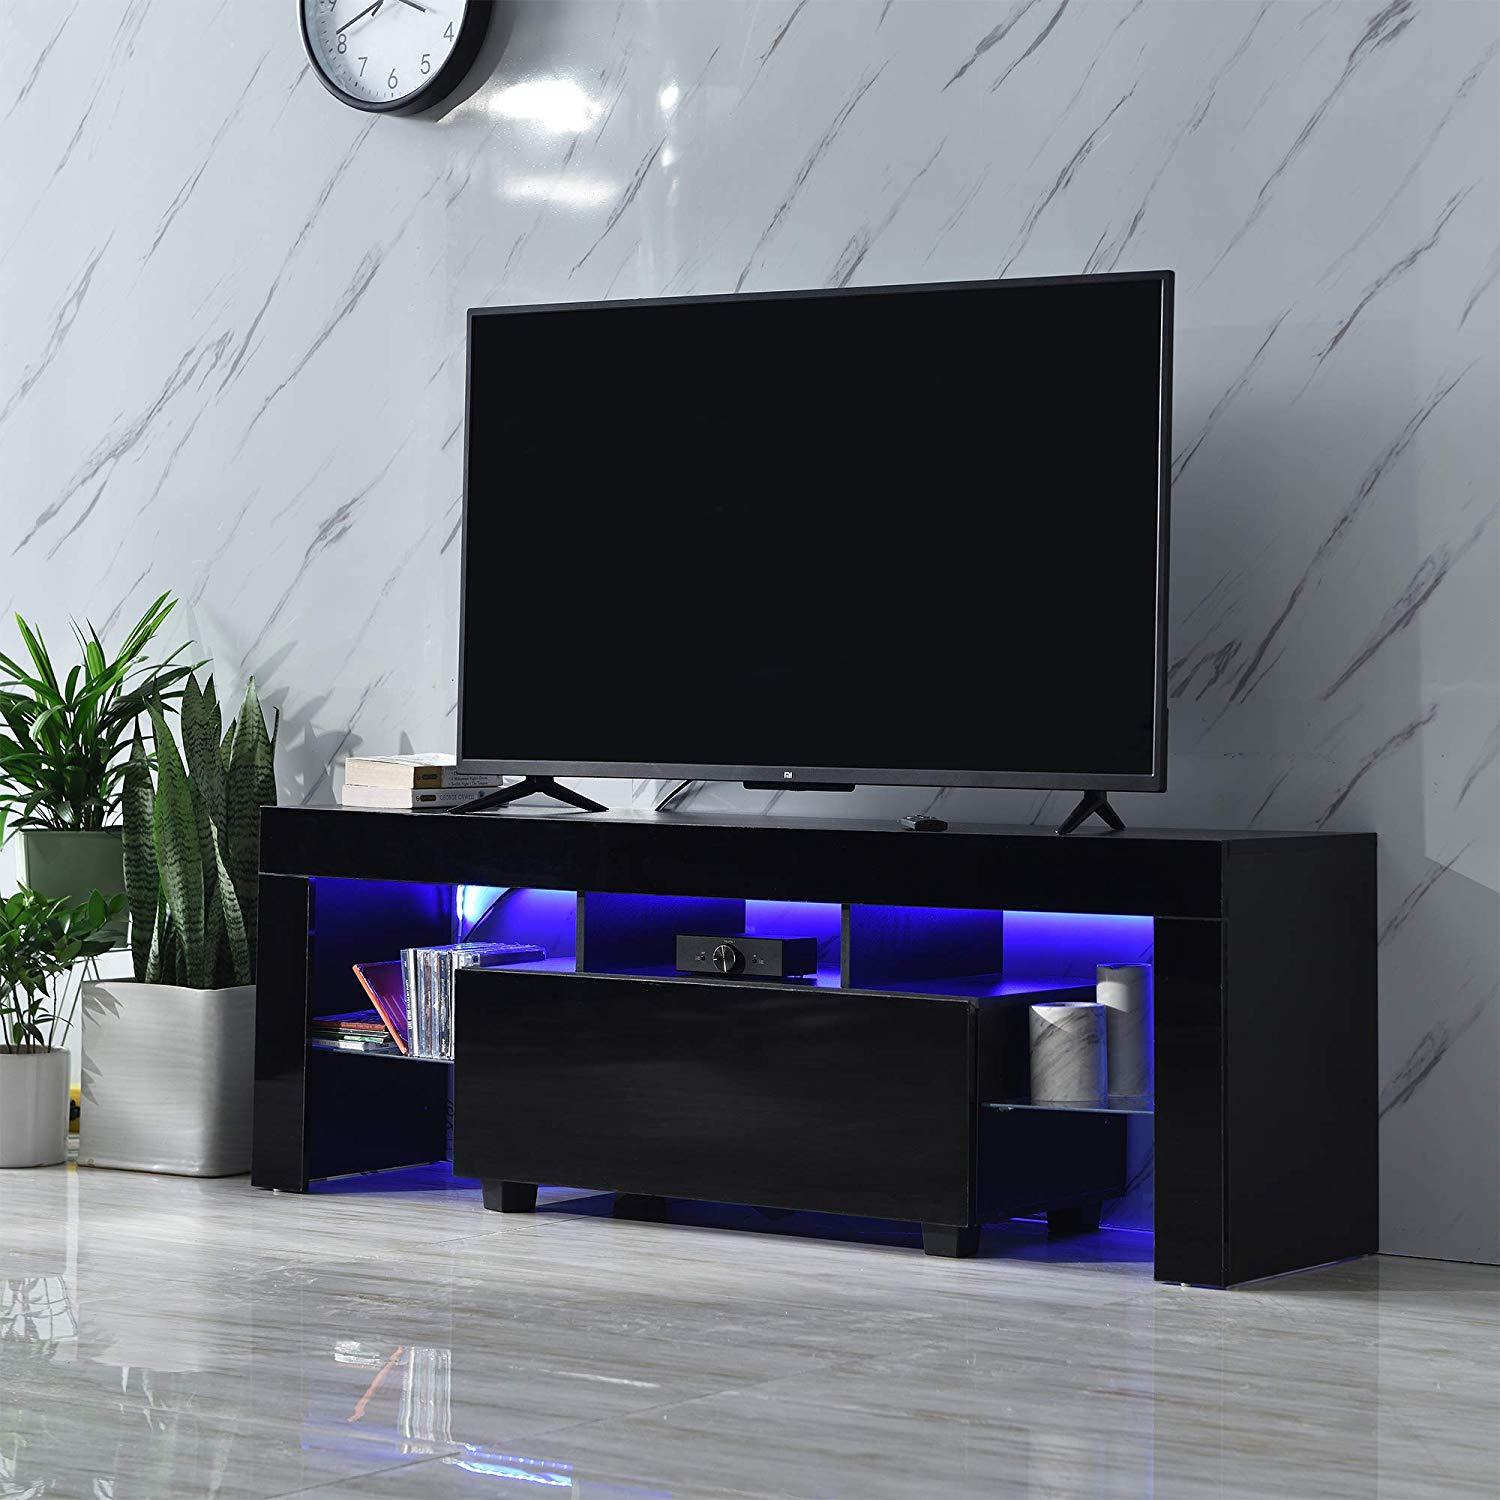 Cherry Tree Furniture MELDAL LED High Gloss TV Stand, TV Unit Cabinet for TV Size up to 51" Black, 130 cm